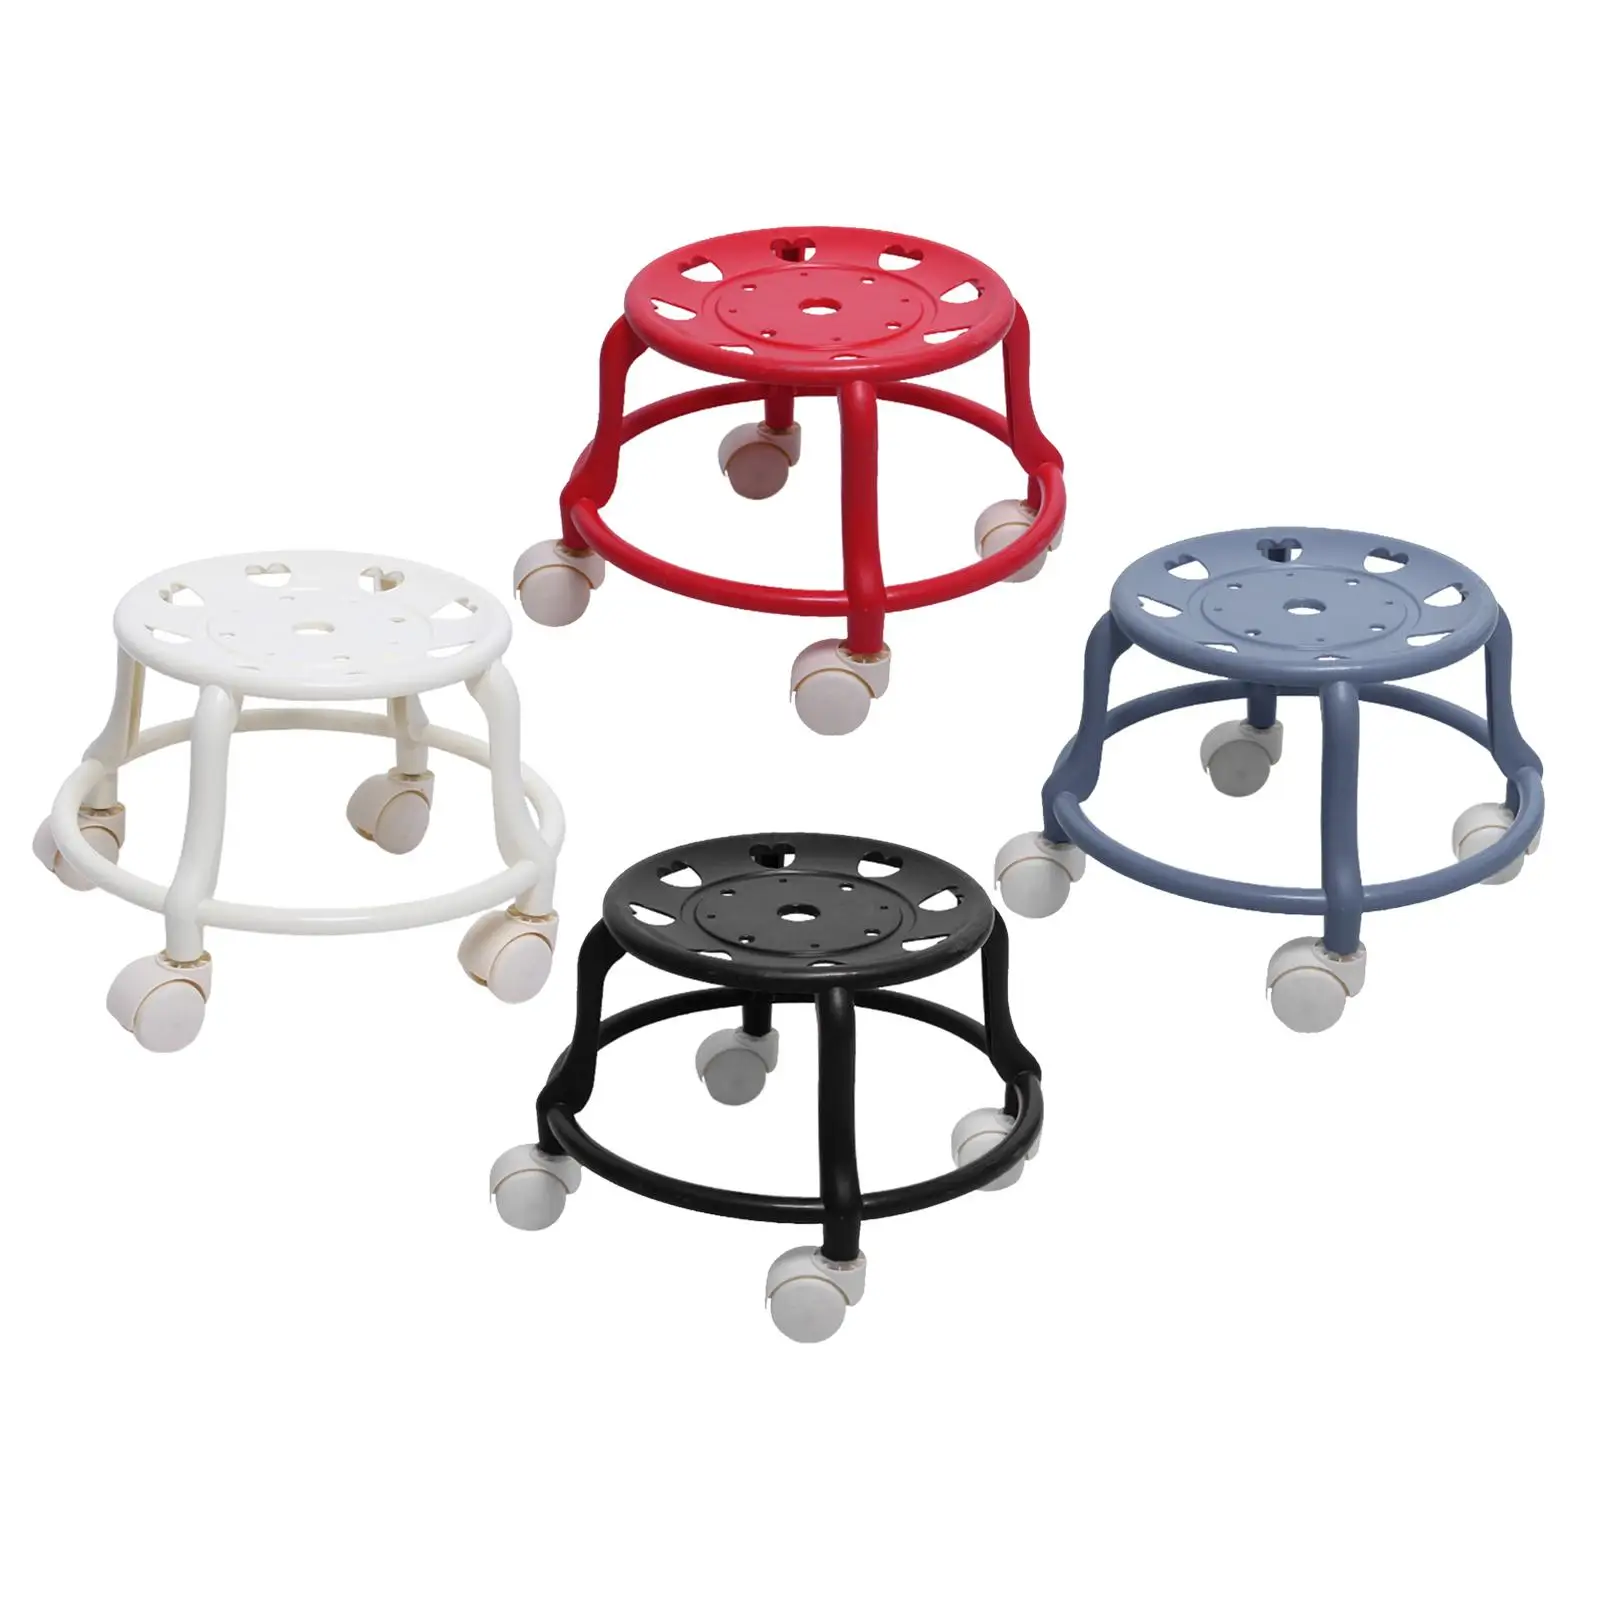 Low Roller Stool Comfortable Easy to Move Low Noise Pedicure Stool Kids Rolling Seat Stool Housework Stool for Garage Home Salon